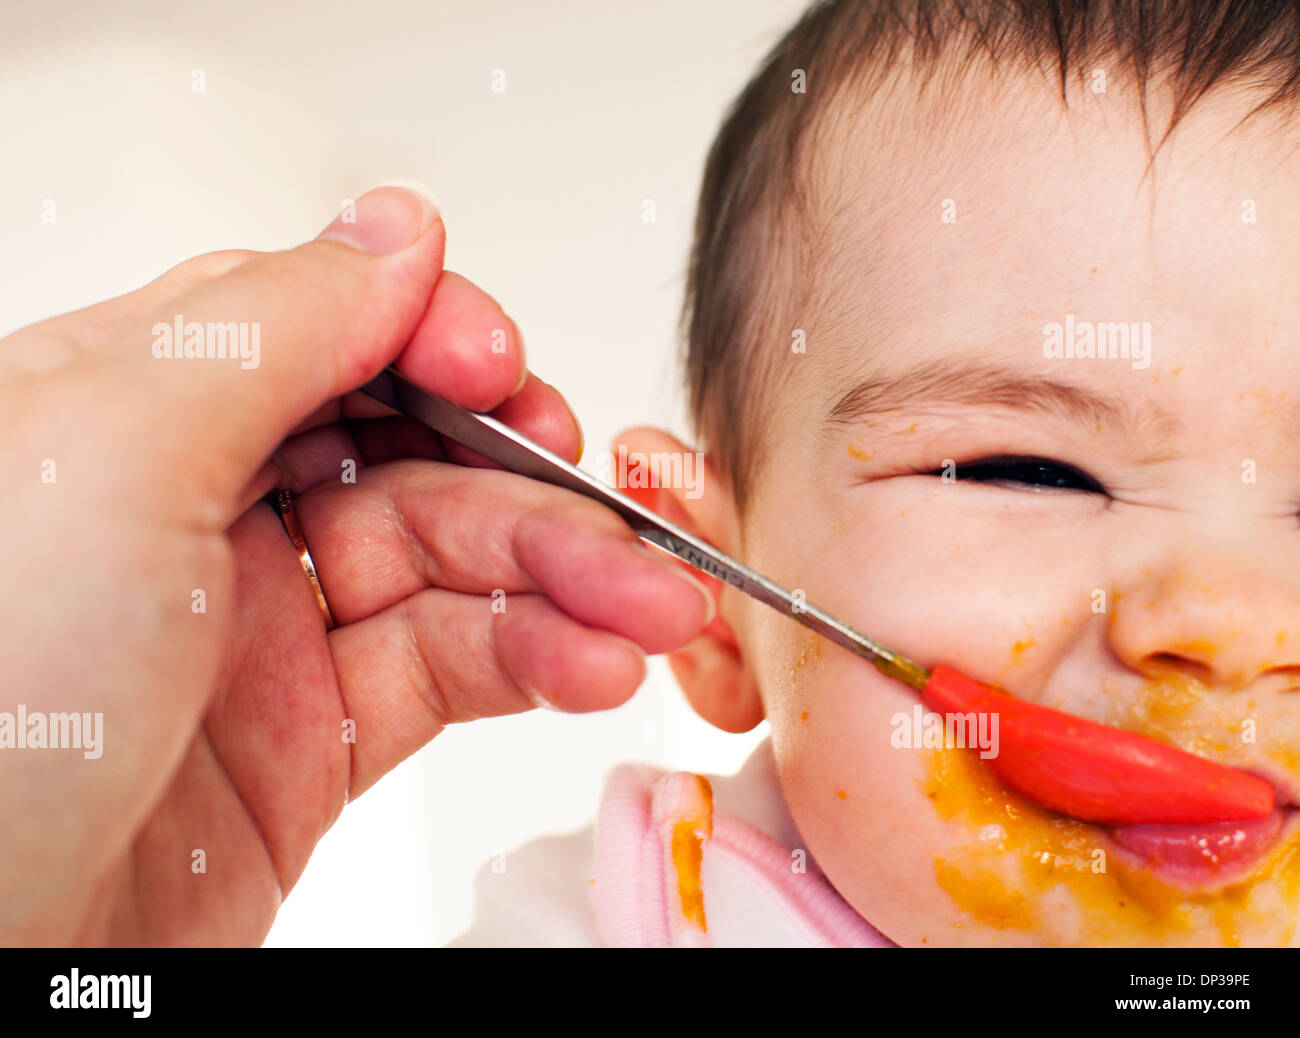 Baby making sour face while eating Stock Photo